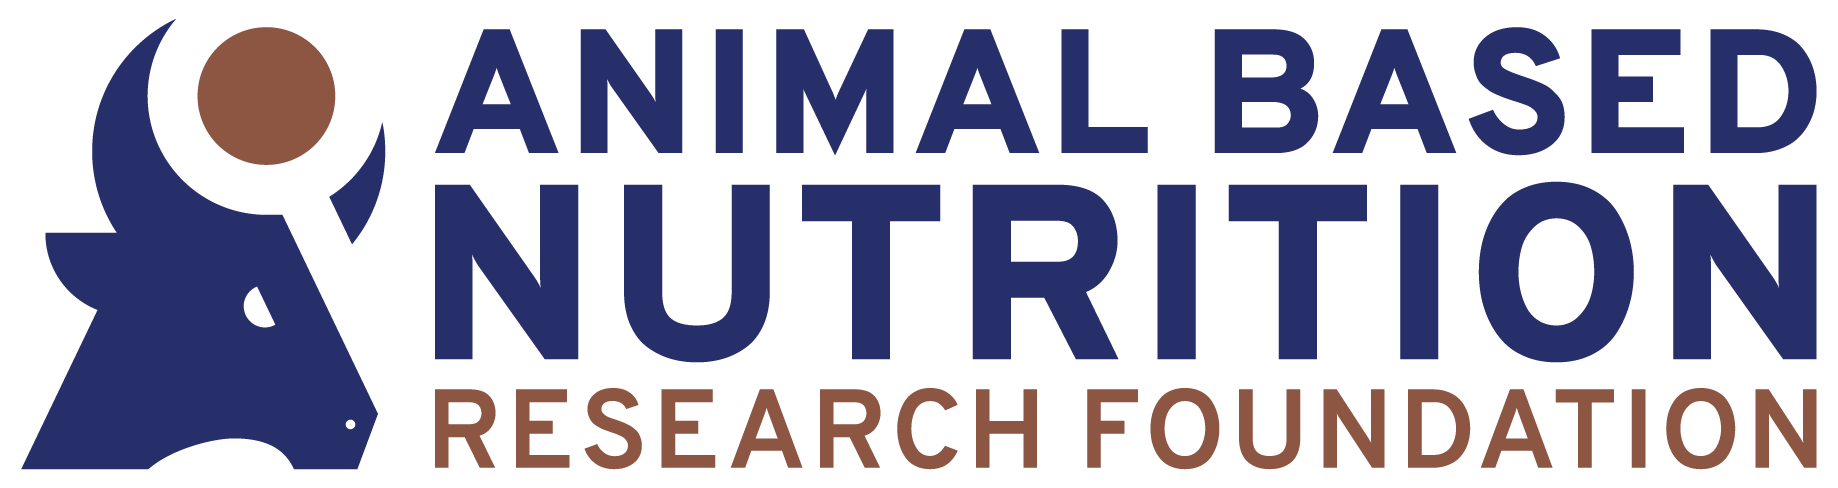 Animal Based Nutrition Research Foundation logo